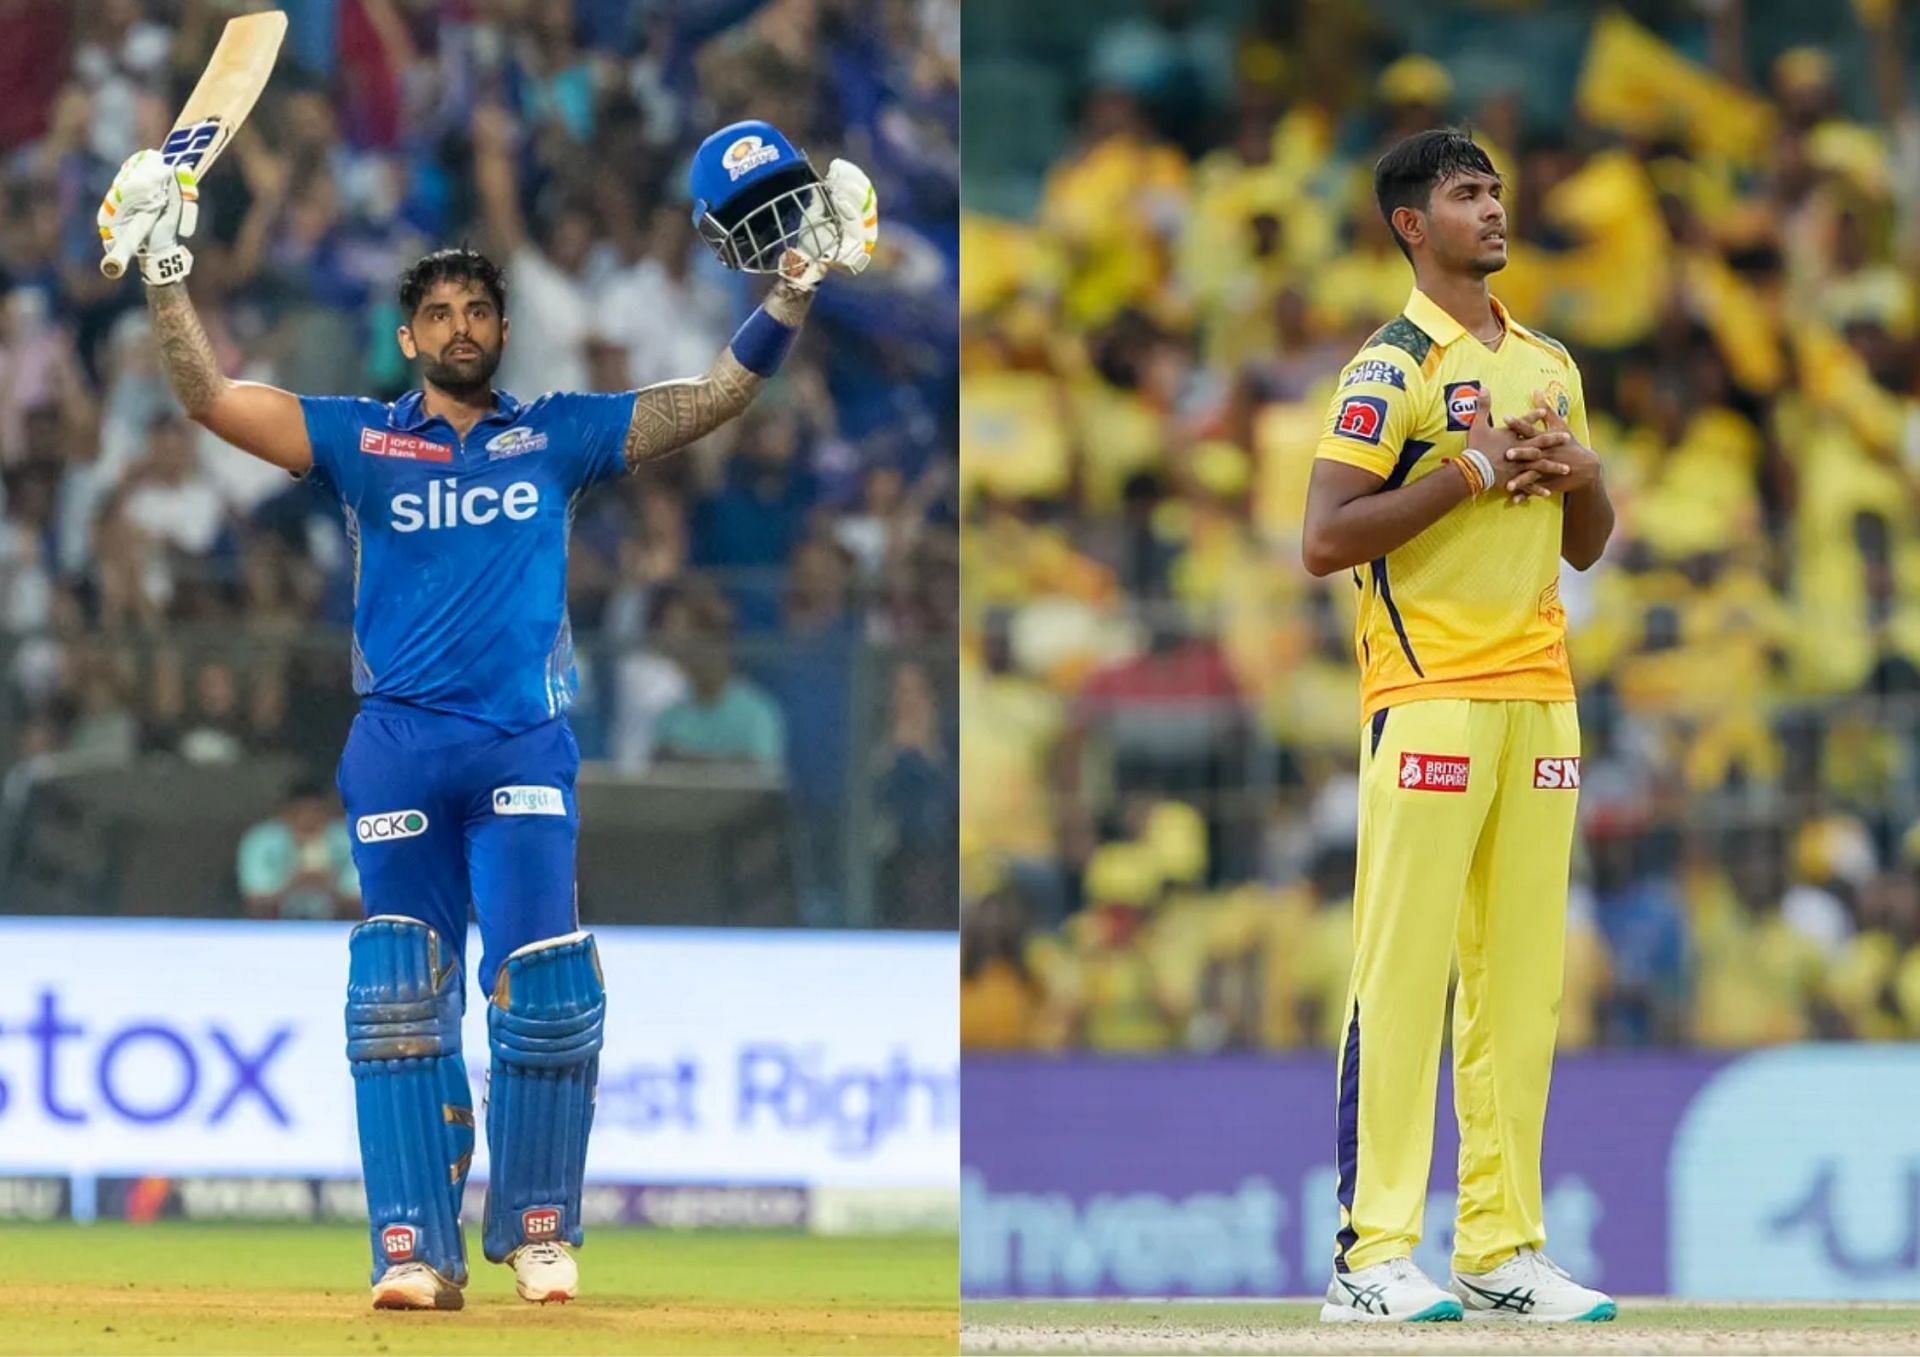 Suryakumar Yadav and Matheesha Pathirana were at their incredible best in the week gone by in IPL 2023 (Picture Credits: BCCI).